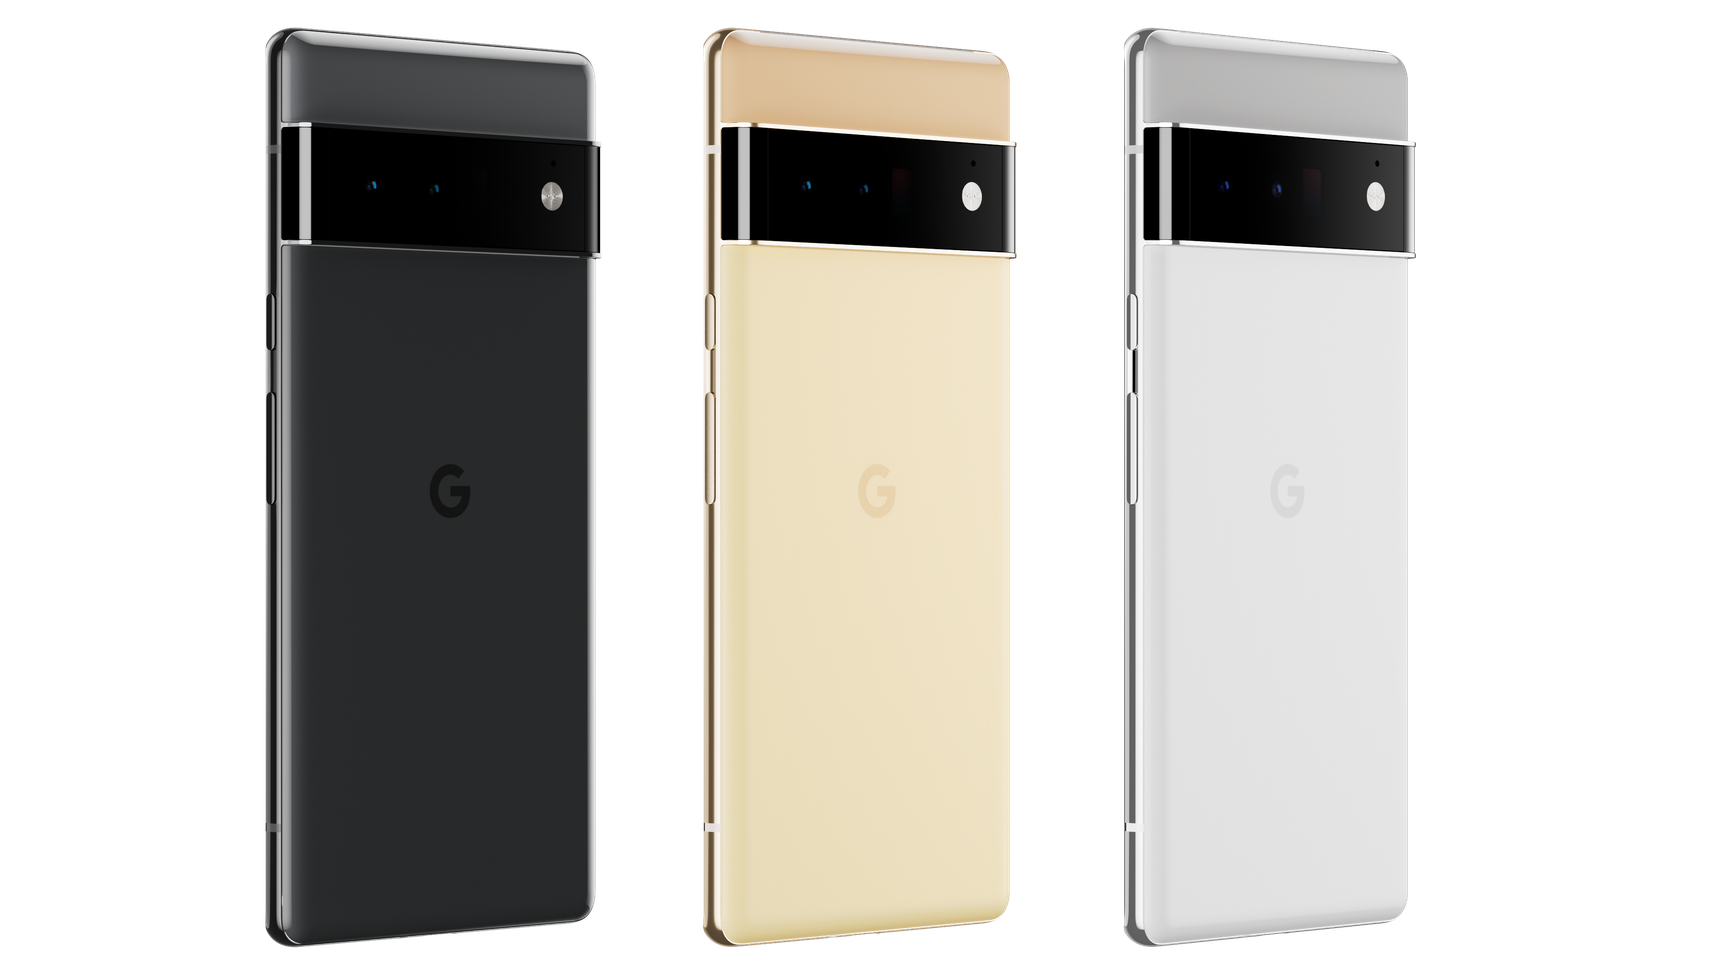 Google Pixel 6 and 6 Pro phones announced with custom Tensor chips